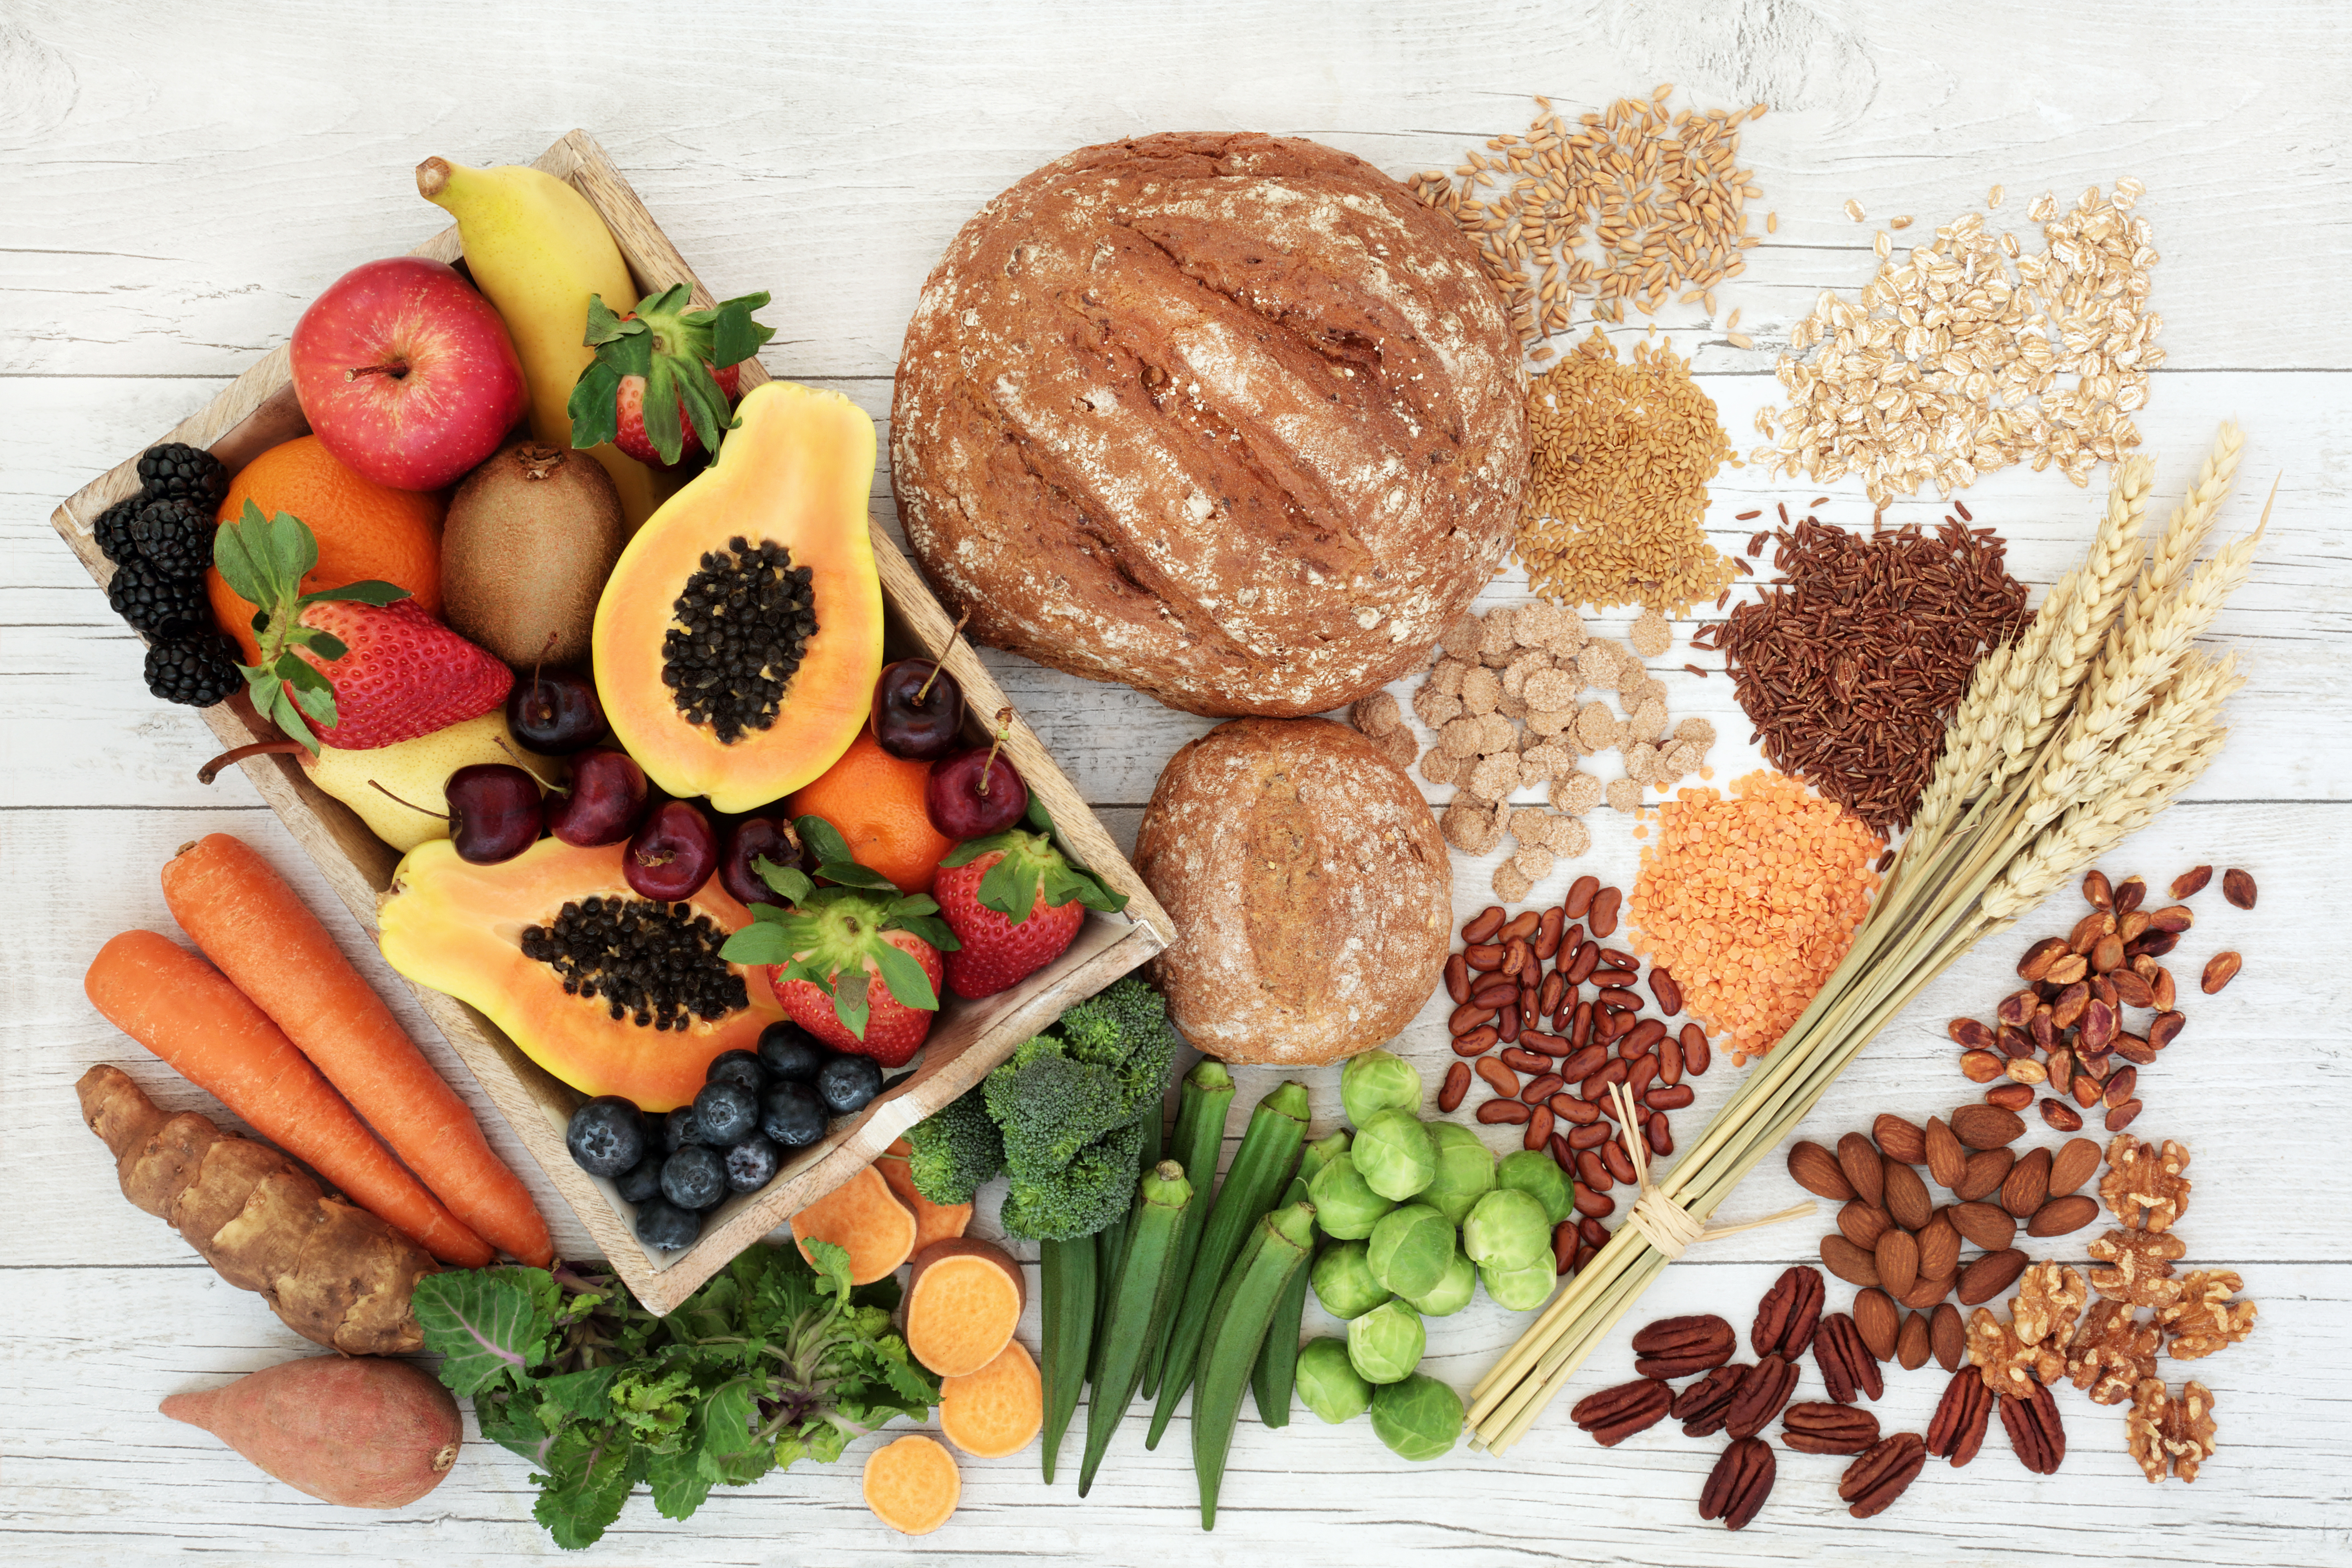 Healthy high fiber diet food concept with legumes, fruit, vegetables, wholegrain bread, cereals, grains, nuts and seeds. Super foods high in antioxidants, anthocyanins, omega 3 and vitamins. Rustic wood background, top view.